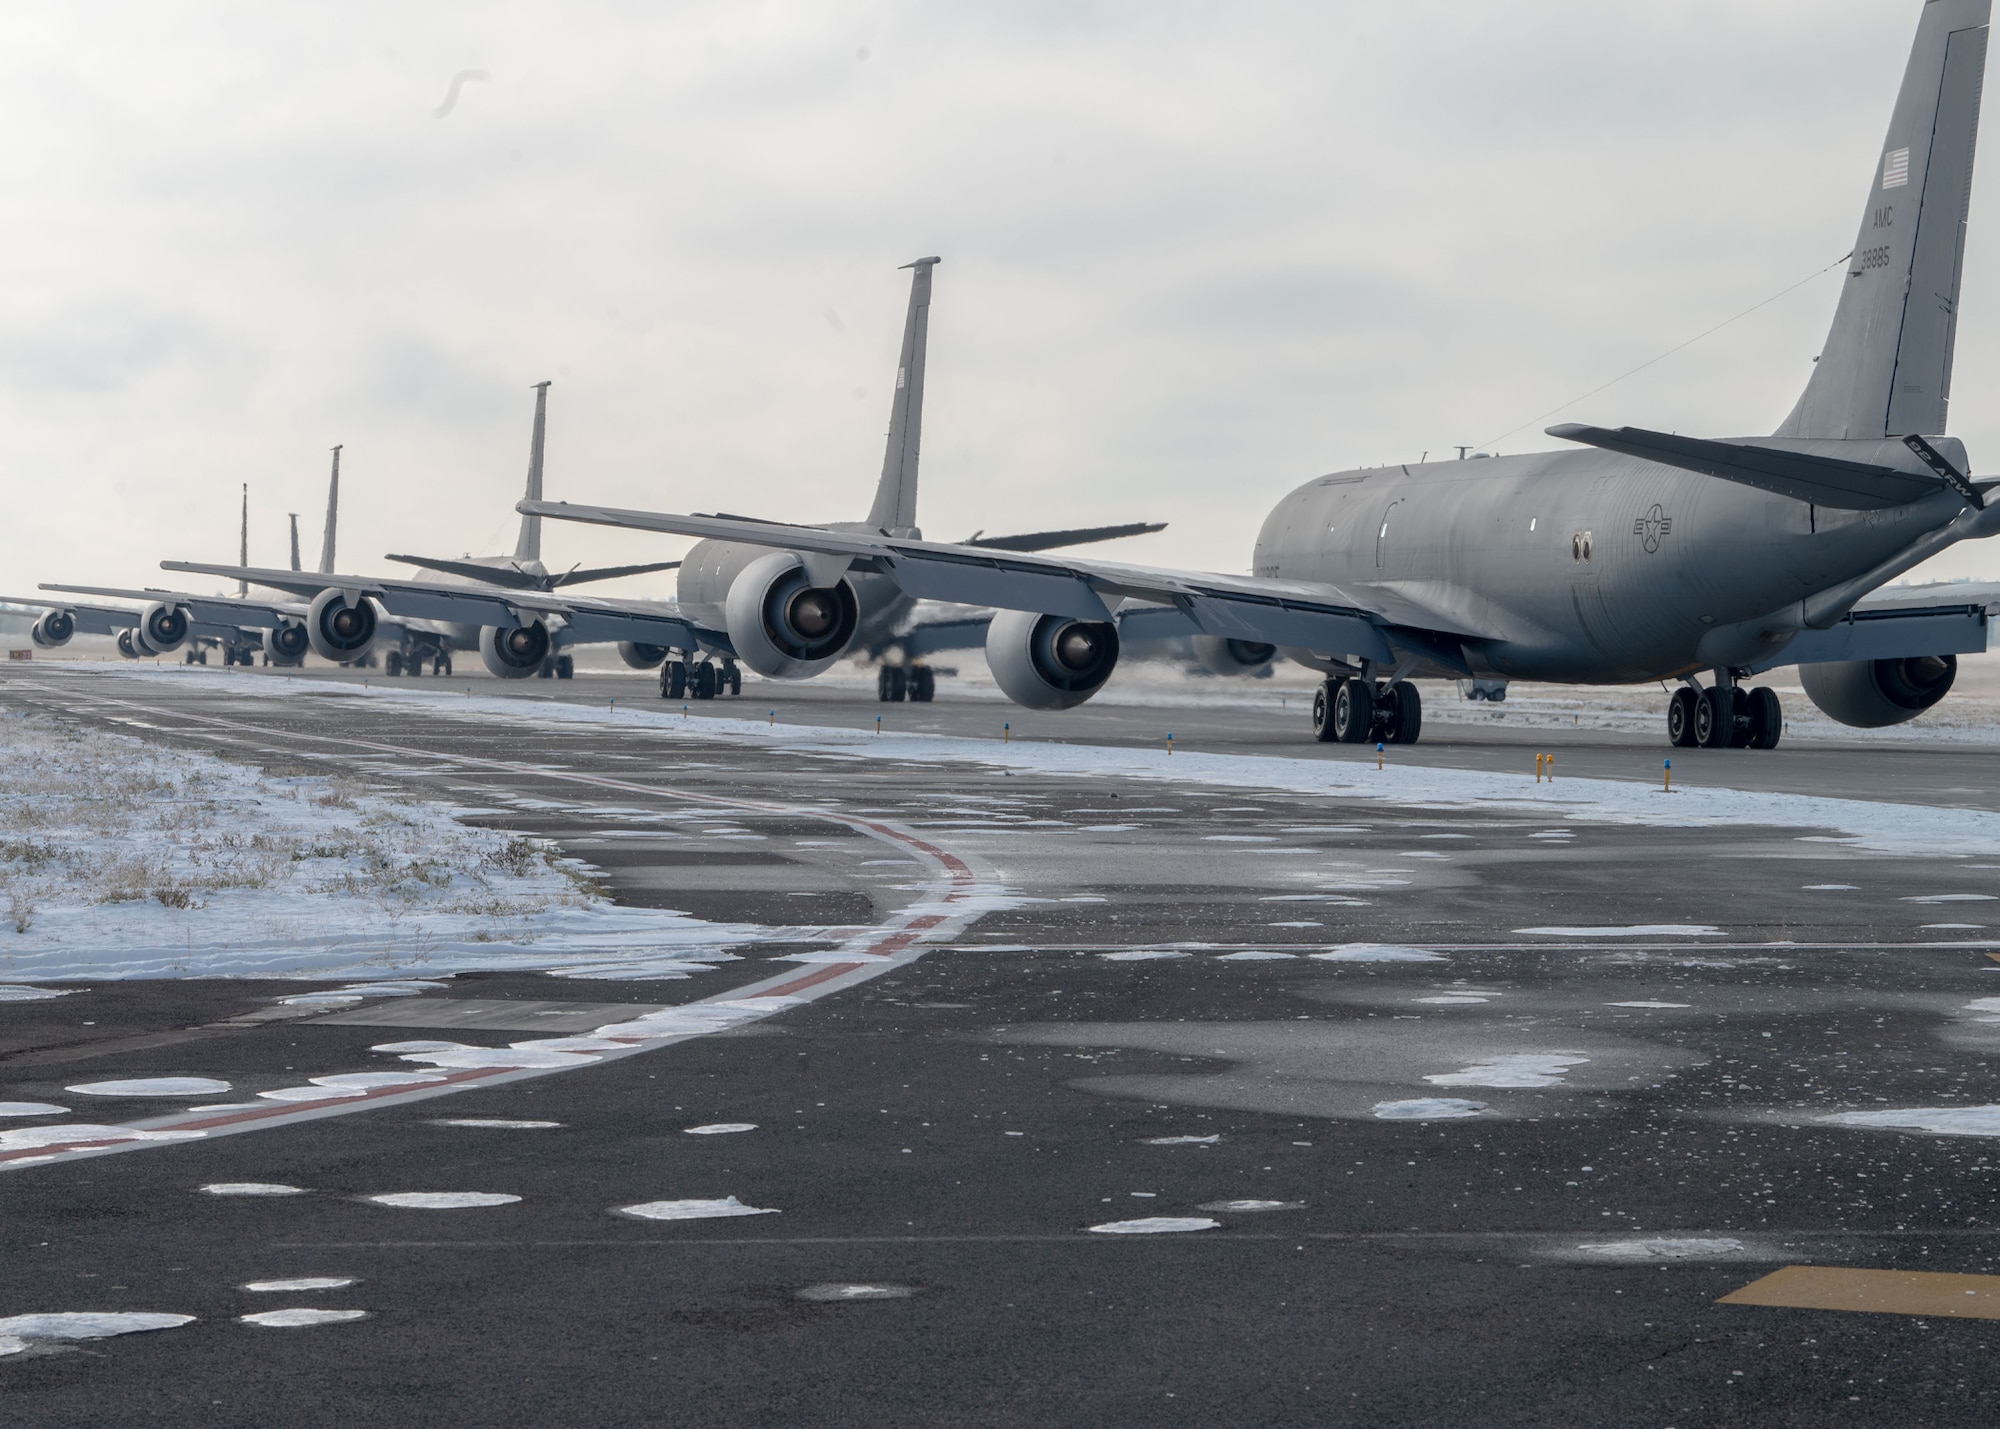 Multiple KC-135 Stratotankers prepare to taxi during Titan Fury 23-1 at Fairchild Air Force Base, Washington, Nov. 10, 2022. The KC-135 Stratotanker aircraft has been utilized for decades to extend global reach and deterrence through aerial refueling, ensuring the projection of U.S. air power and deterrence of potential adversaries. They fuel strategic bombers, mobility and fighter aircraft, and airborne national command centers. (U.S. Air Force photo by Airman 1st Class Stassney Davis)